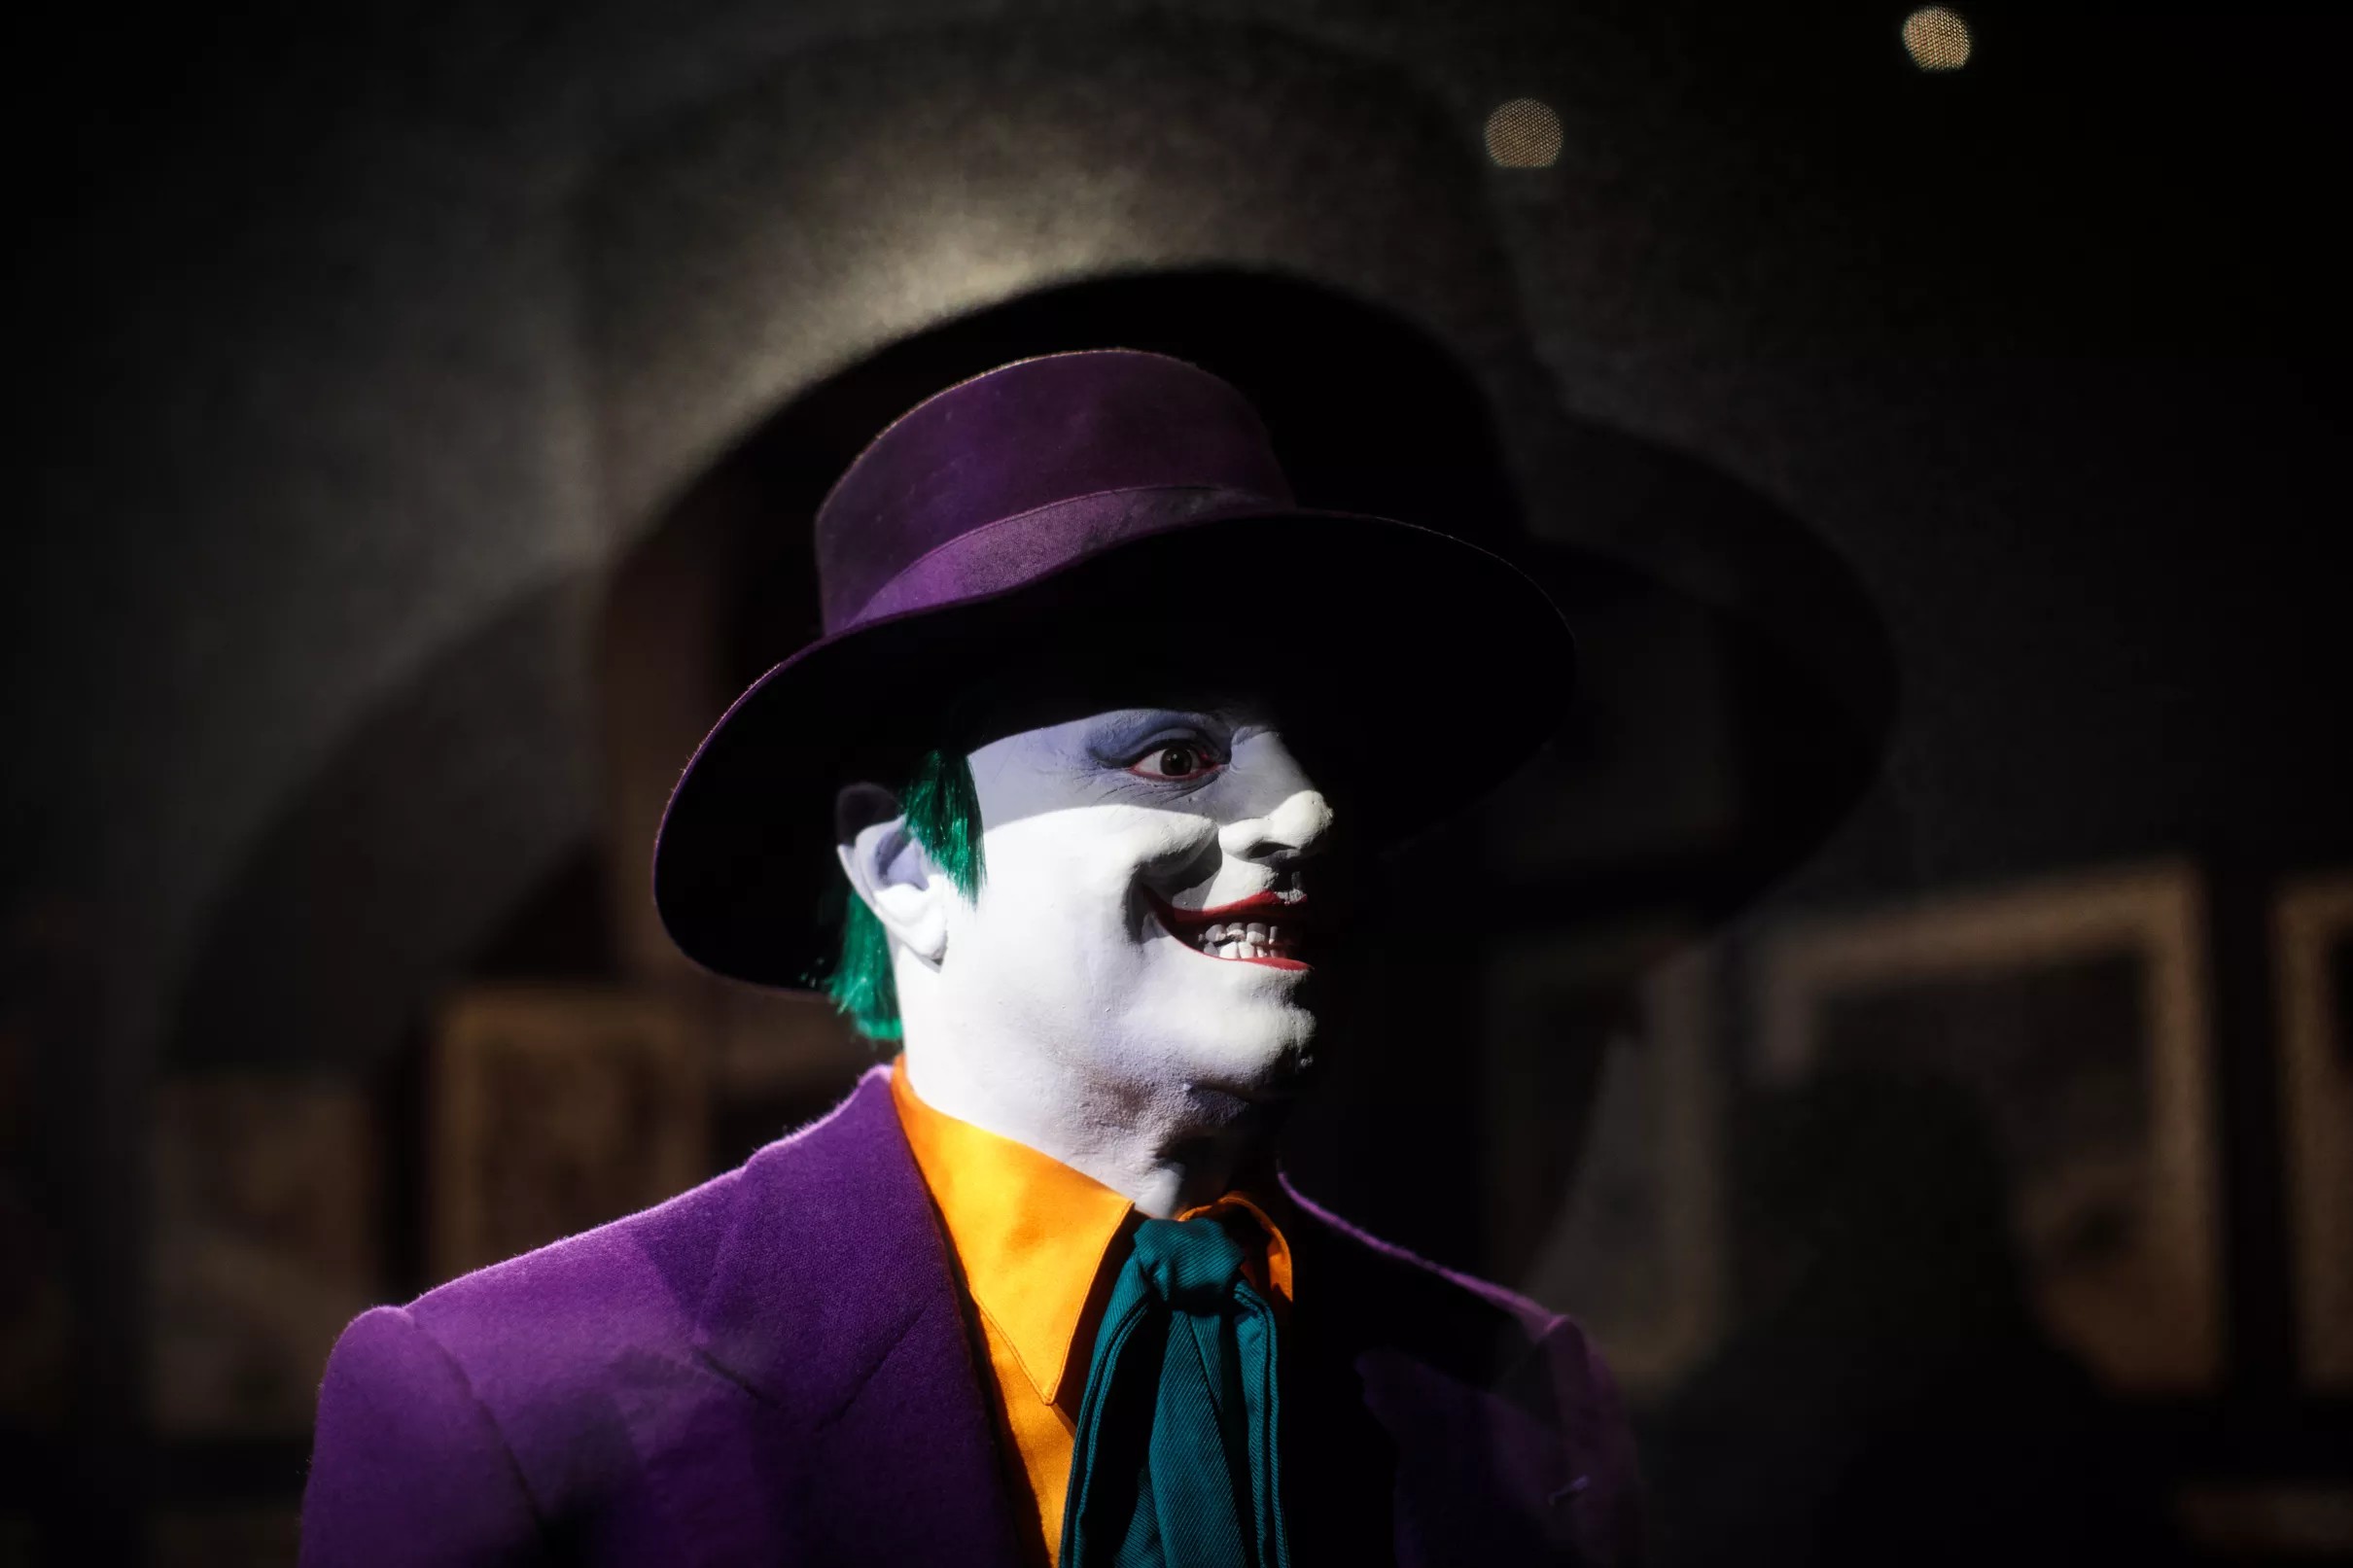 The Joker’s real origin story comes from an even darker place